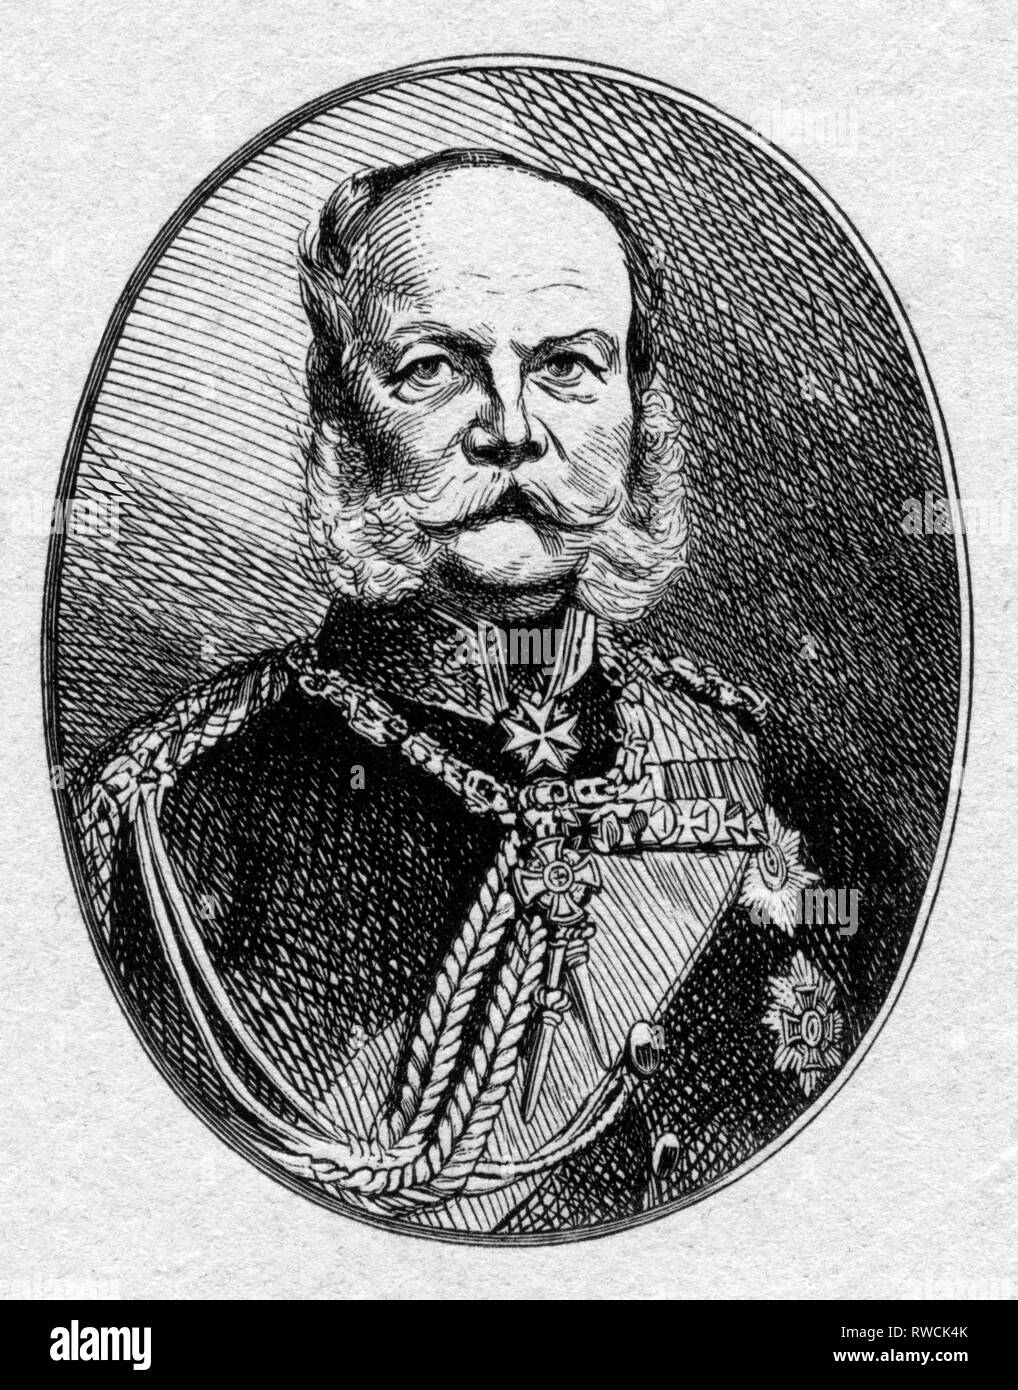 Germany, the German Empire, German Emperor William I, steel engraving probably around 1840, from a book., Artist's Copyright has not to be cleared Stock Photo